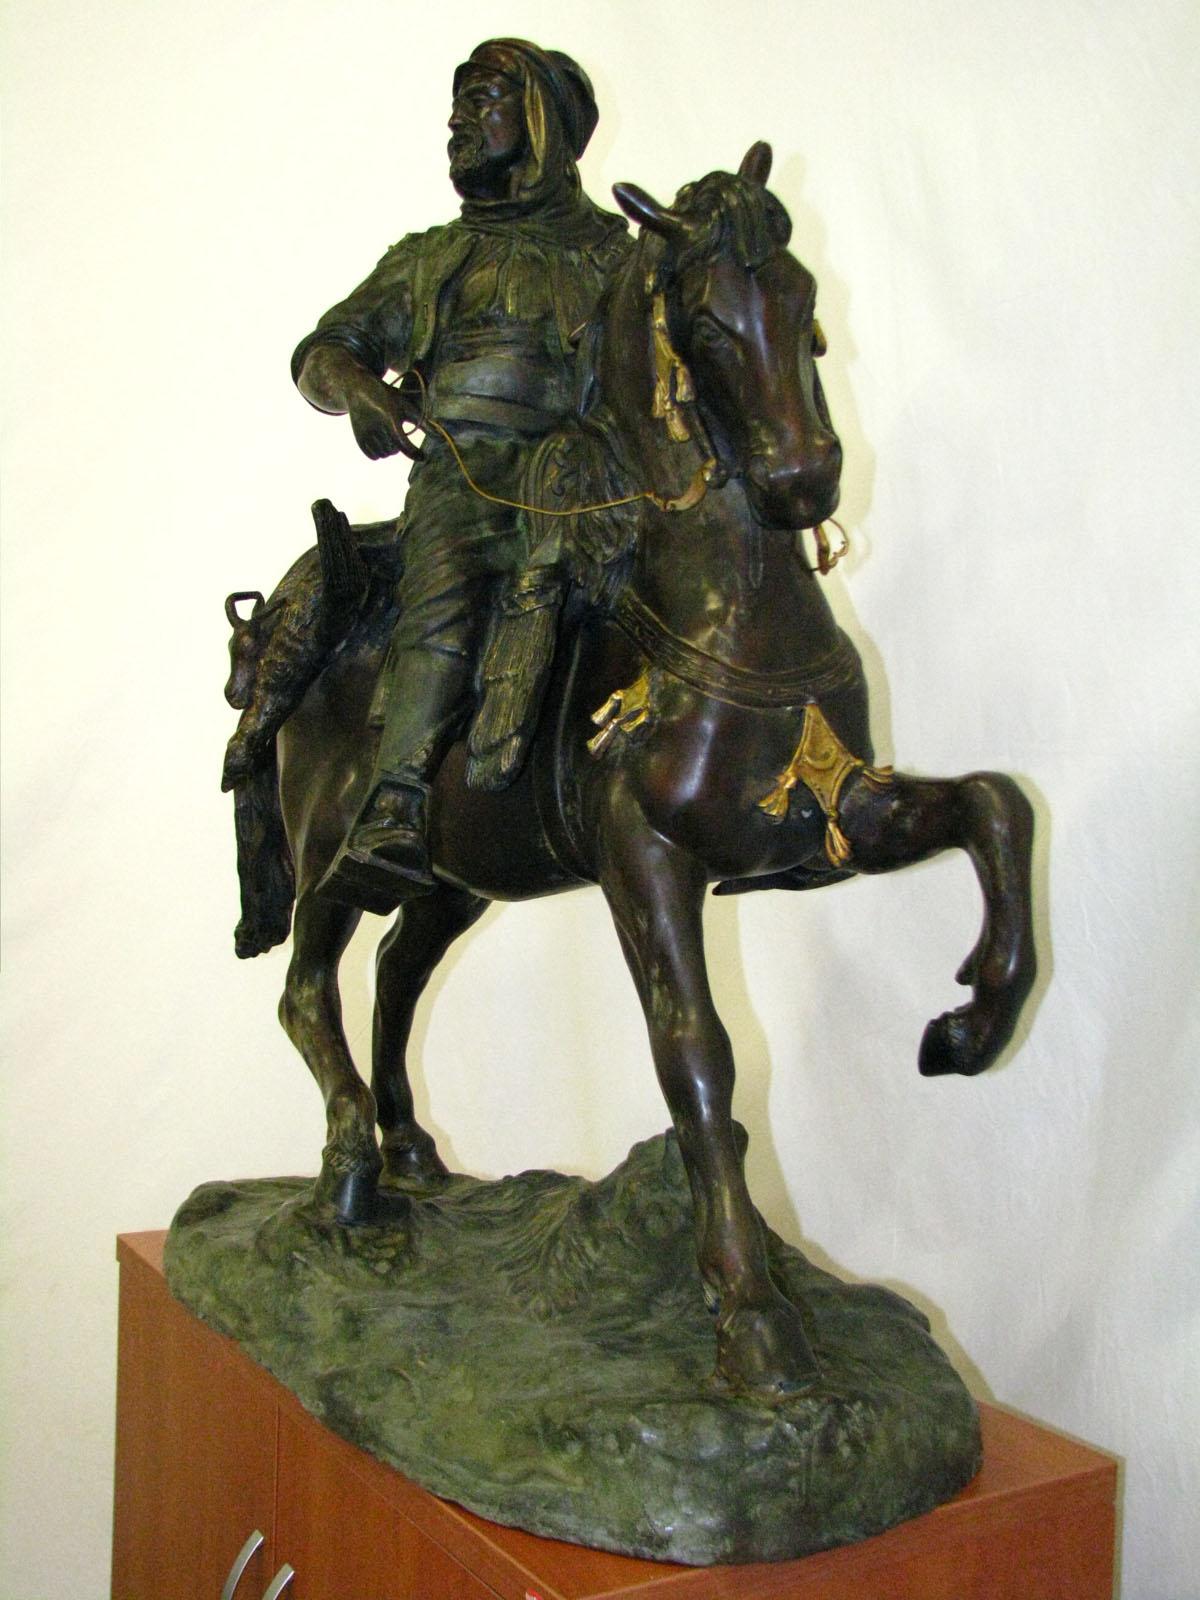 Bronze cavalier moor return hunting also called Cavaliere Arabo
Extremely effective, impressive and presentable,
bronze sculpture over a meter high,
depicting a Moorish rider returning from a hunt.
 
Particularly noteworthy is the master